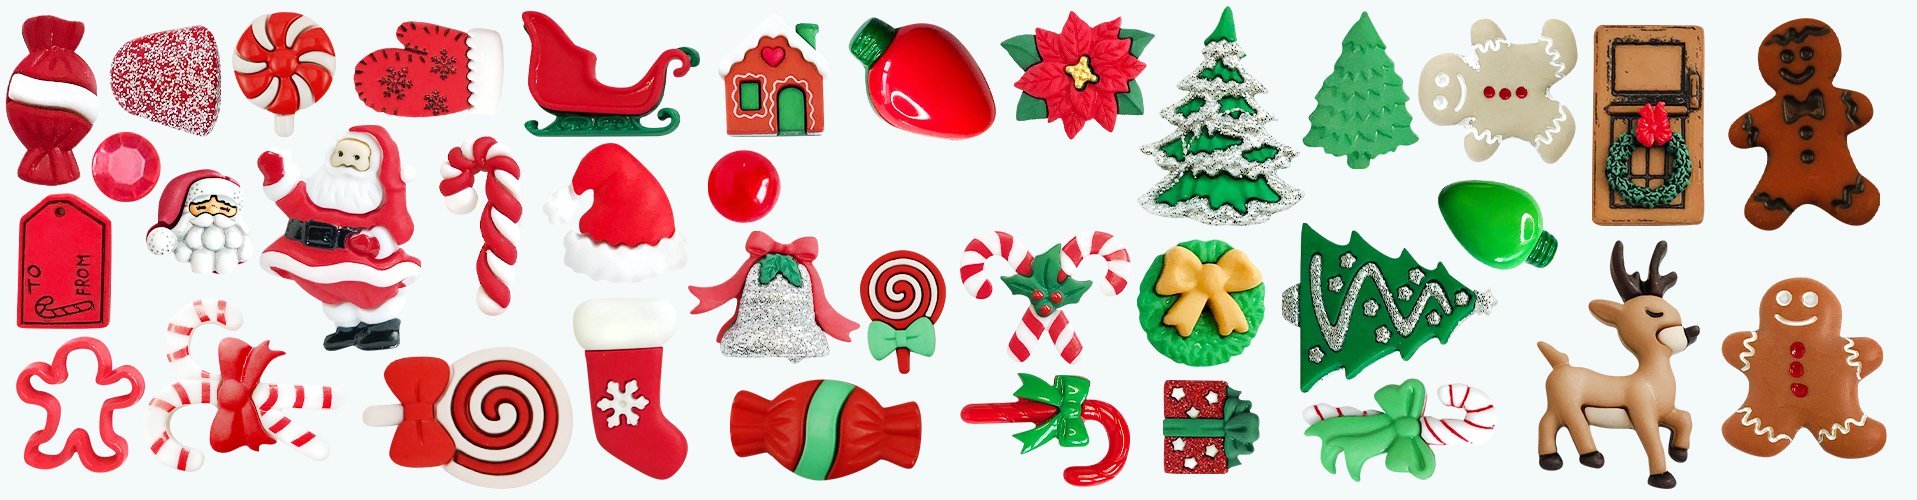 Buttons Galore 40+ Assorted Christmas Buttons for Sewing & Crafts - Set of  6 Button Packs